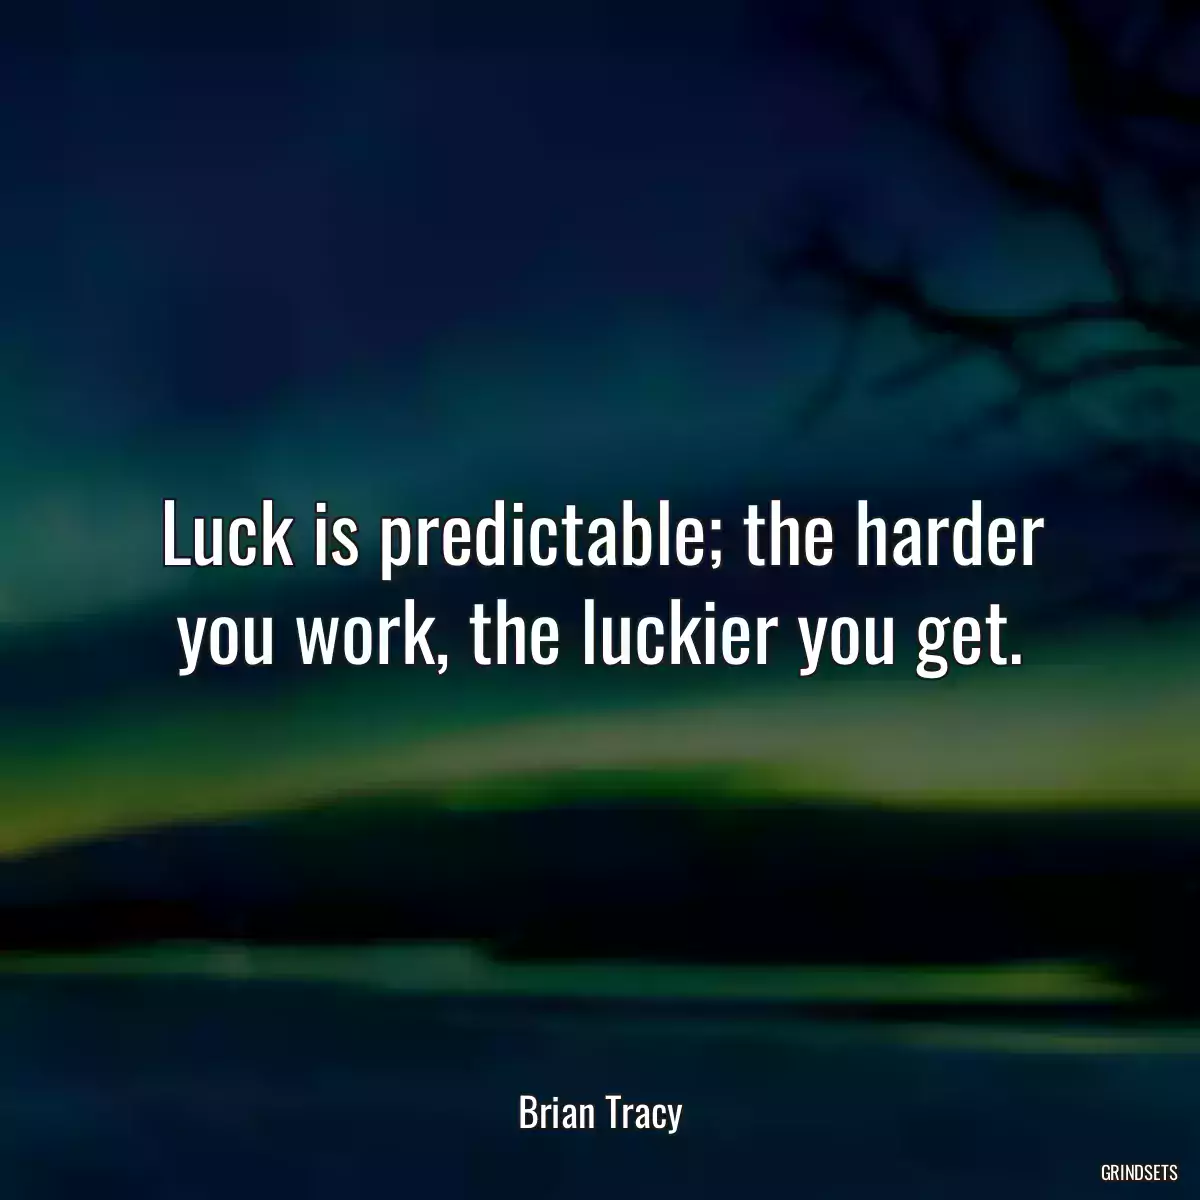 Luck is predictable; the harder you work, the luckier you get.